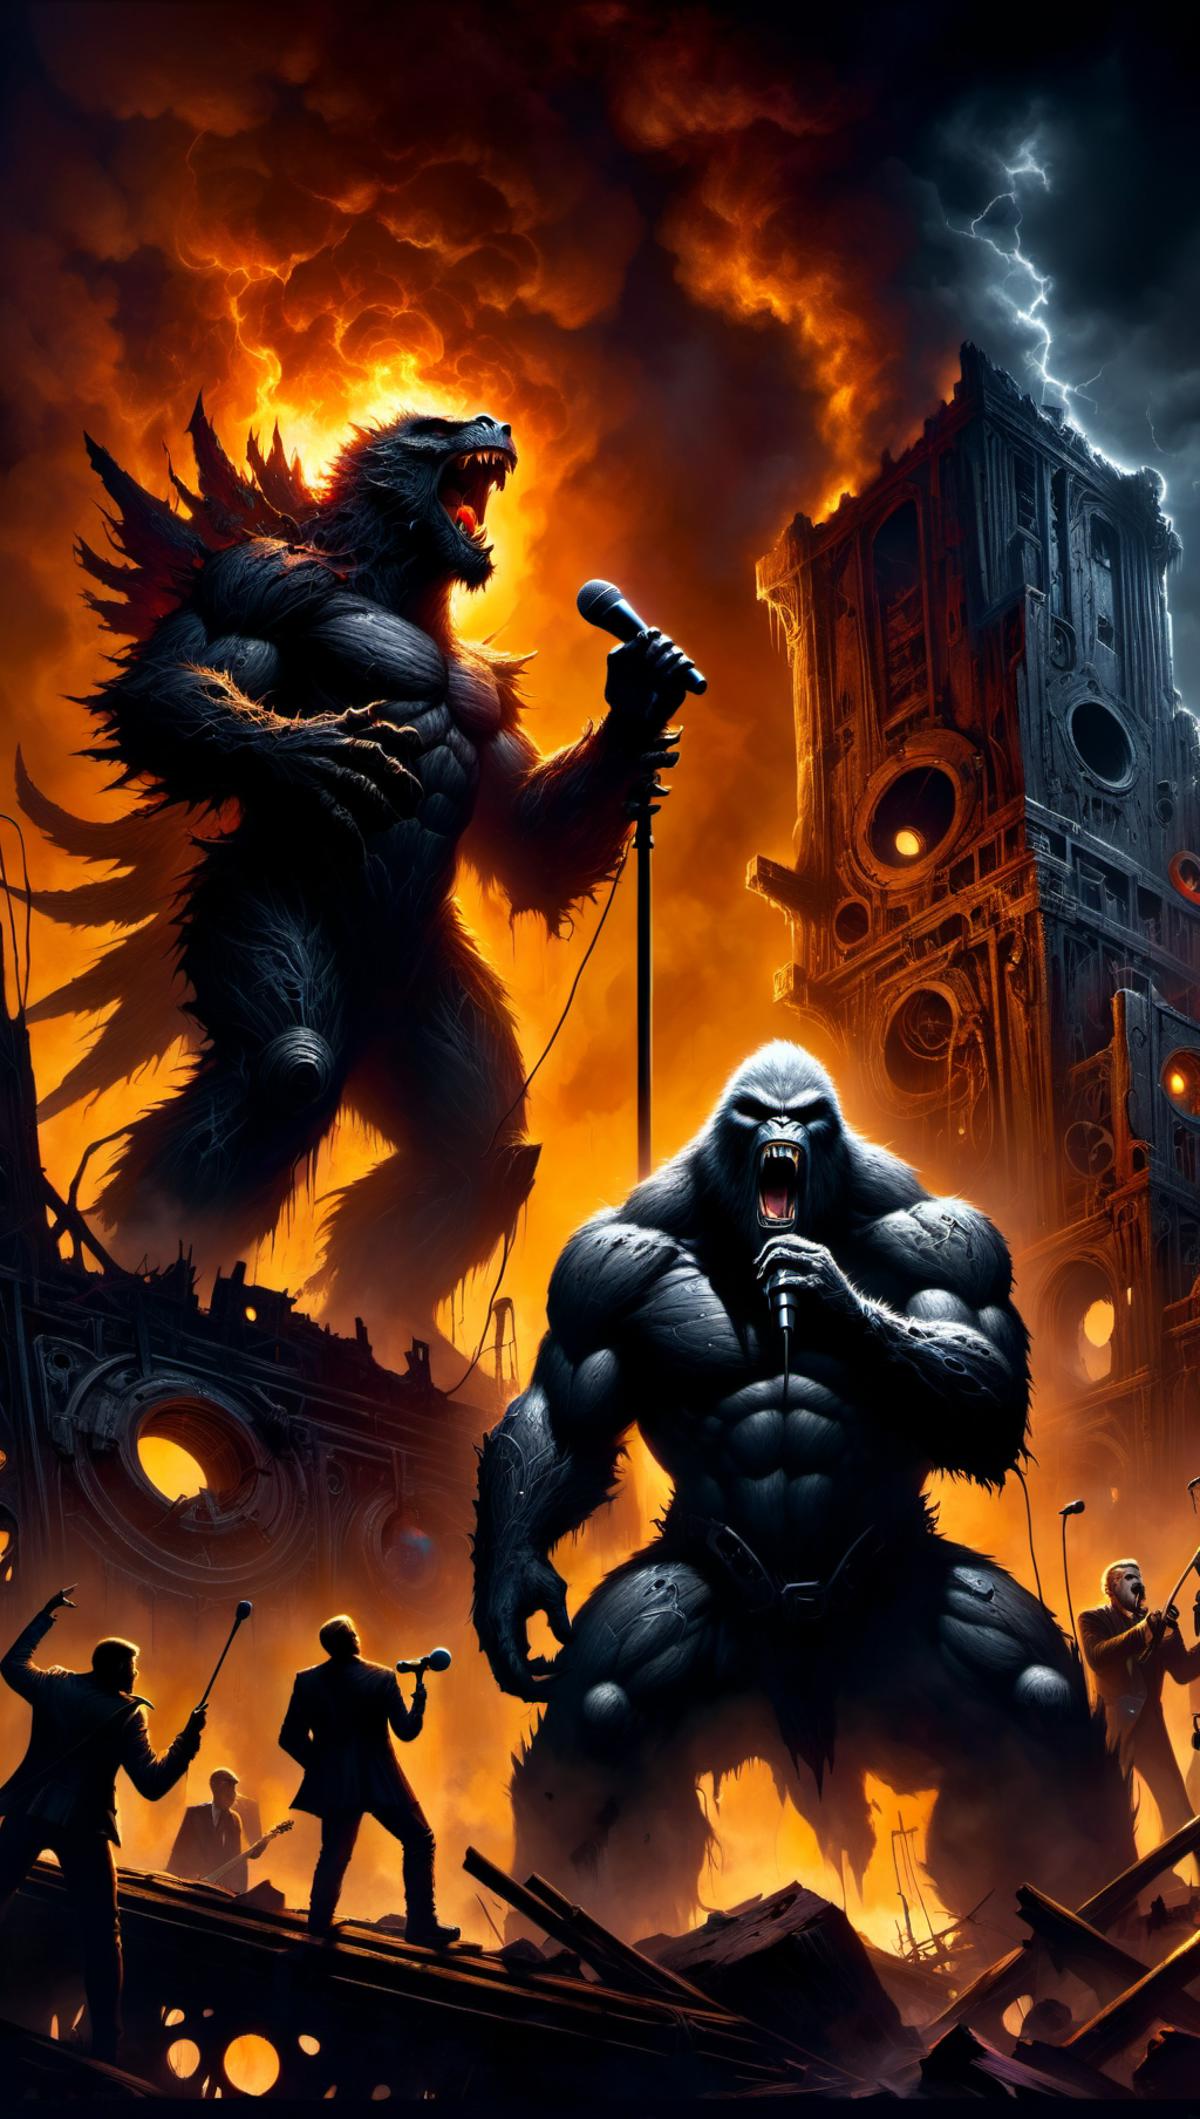 A comic book illustration of a gorilla singing into a microphone with a fierce monster behind him.